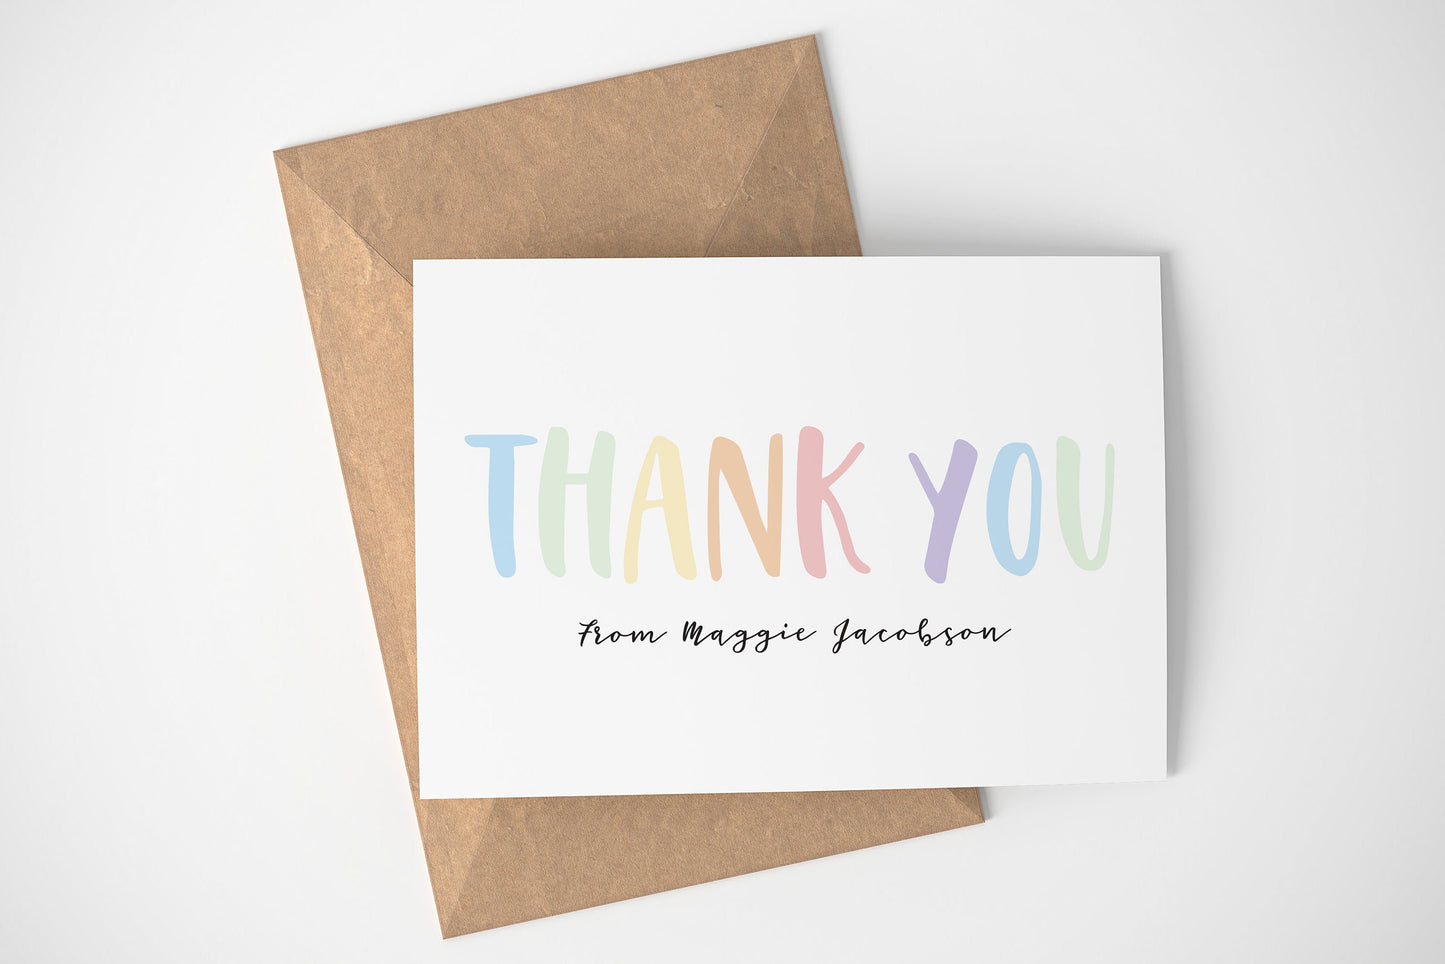 Personalized Kids Thank You Cards | Customized Kids Stationary - Children's Stationary - Thank you Card - Thank You Notes